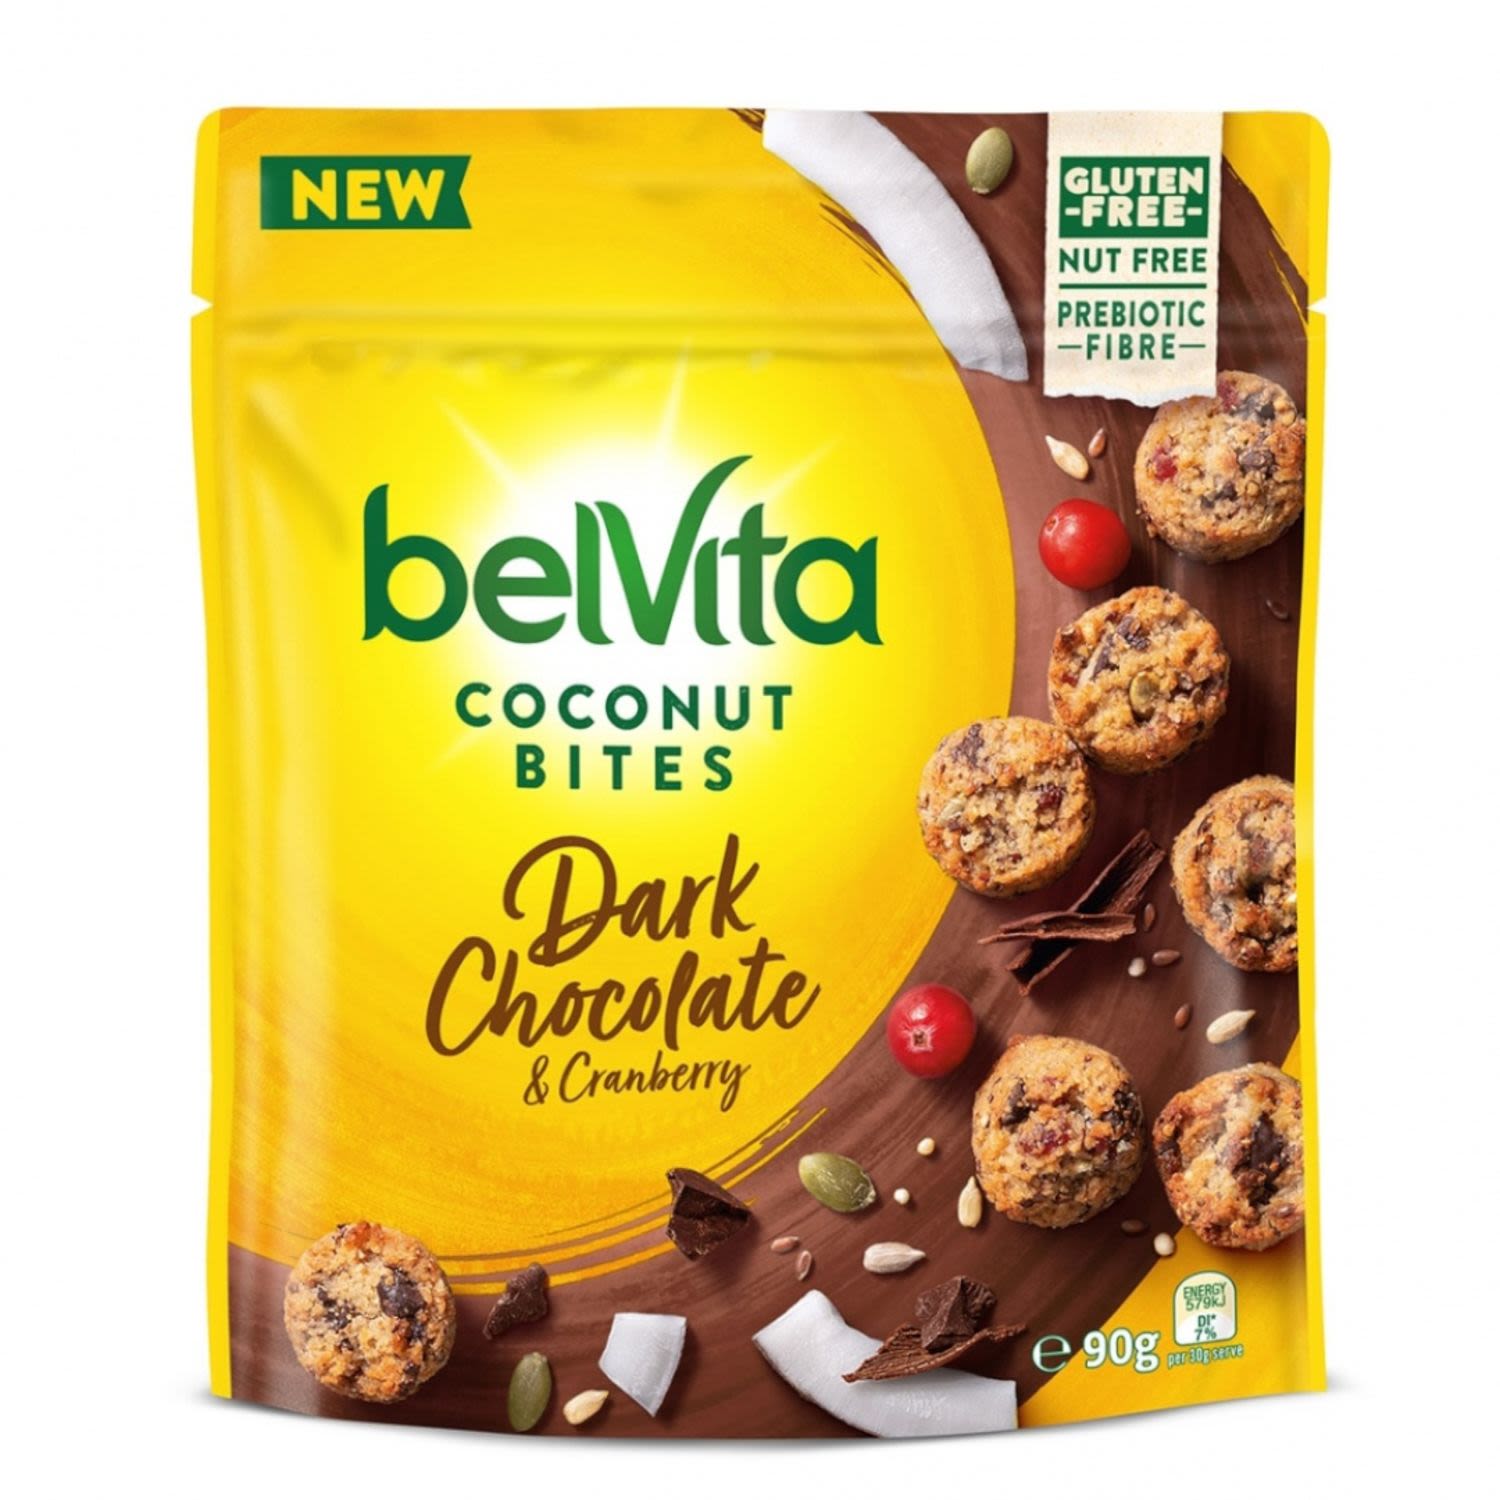 Brighten your day with belVita Coconut Bites
These delicious toasted Coconut Bites are packed with wholesome ingredients including golden coconut, dark chocolate chips & cranberry.

They are delightfully gluten free and nut free, no artificial colours or flavours and with prebiotic fibre. Making these bite-size snacks the perfect option for when you feel like munching on something that is better for you.

- Good source of fibre.
- Wholesome seeds and grains.
- Real chocolate.
- Coconut.<br /> <br />